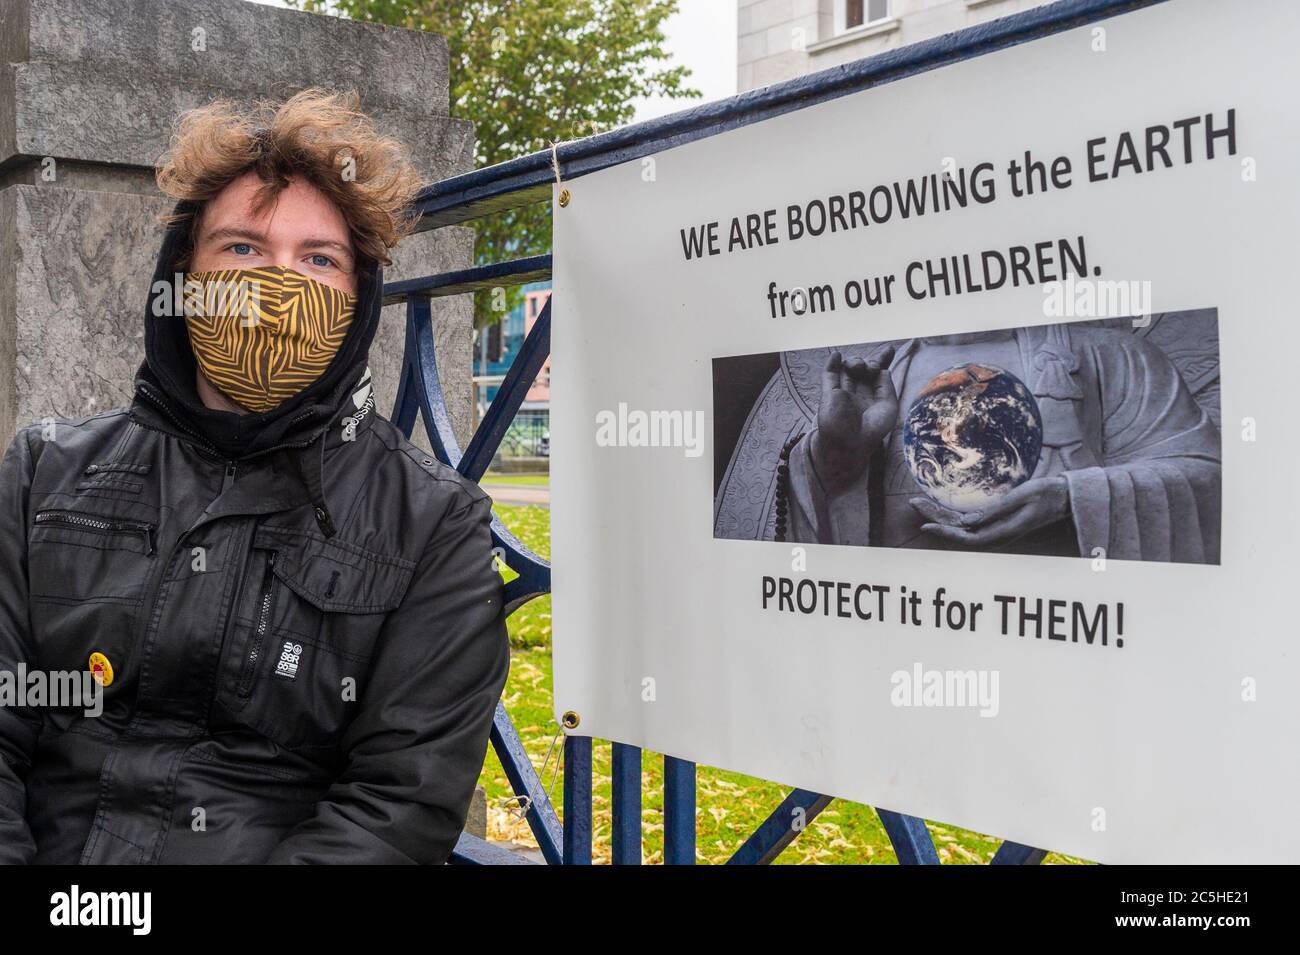 Cork, Ireland. 3rd July, 2020. The Fridays for Future climate protest has resumed after the Covid-19 lockdown. Activists protest every Friday in a school strike for climate. Protesting early this morning was Darragh Cotter from Mayfield. Credit: AG News/Alamy Live News Stock Photo